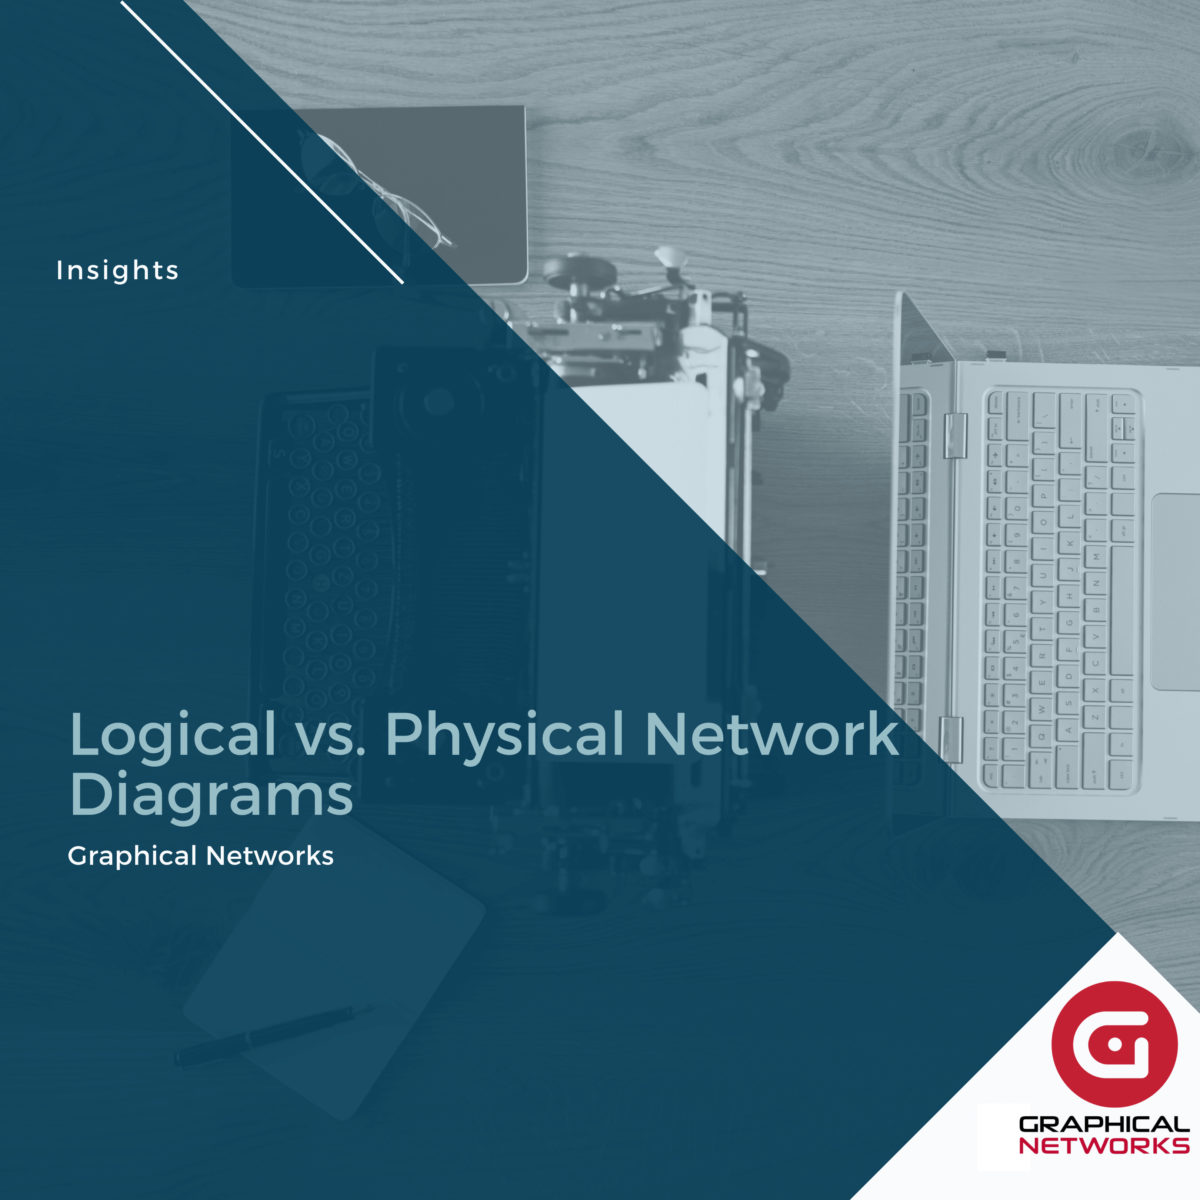 Logical vs. Physical Network Diagrams